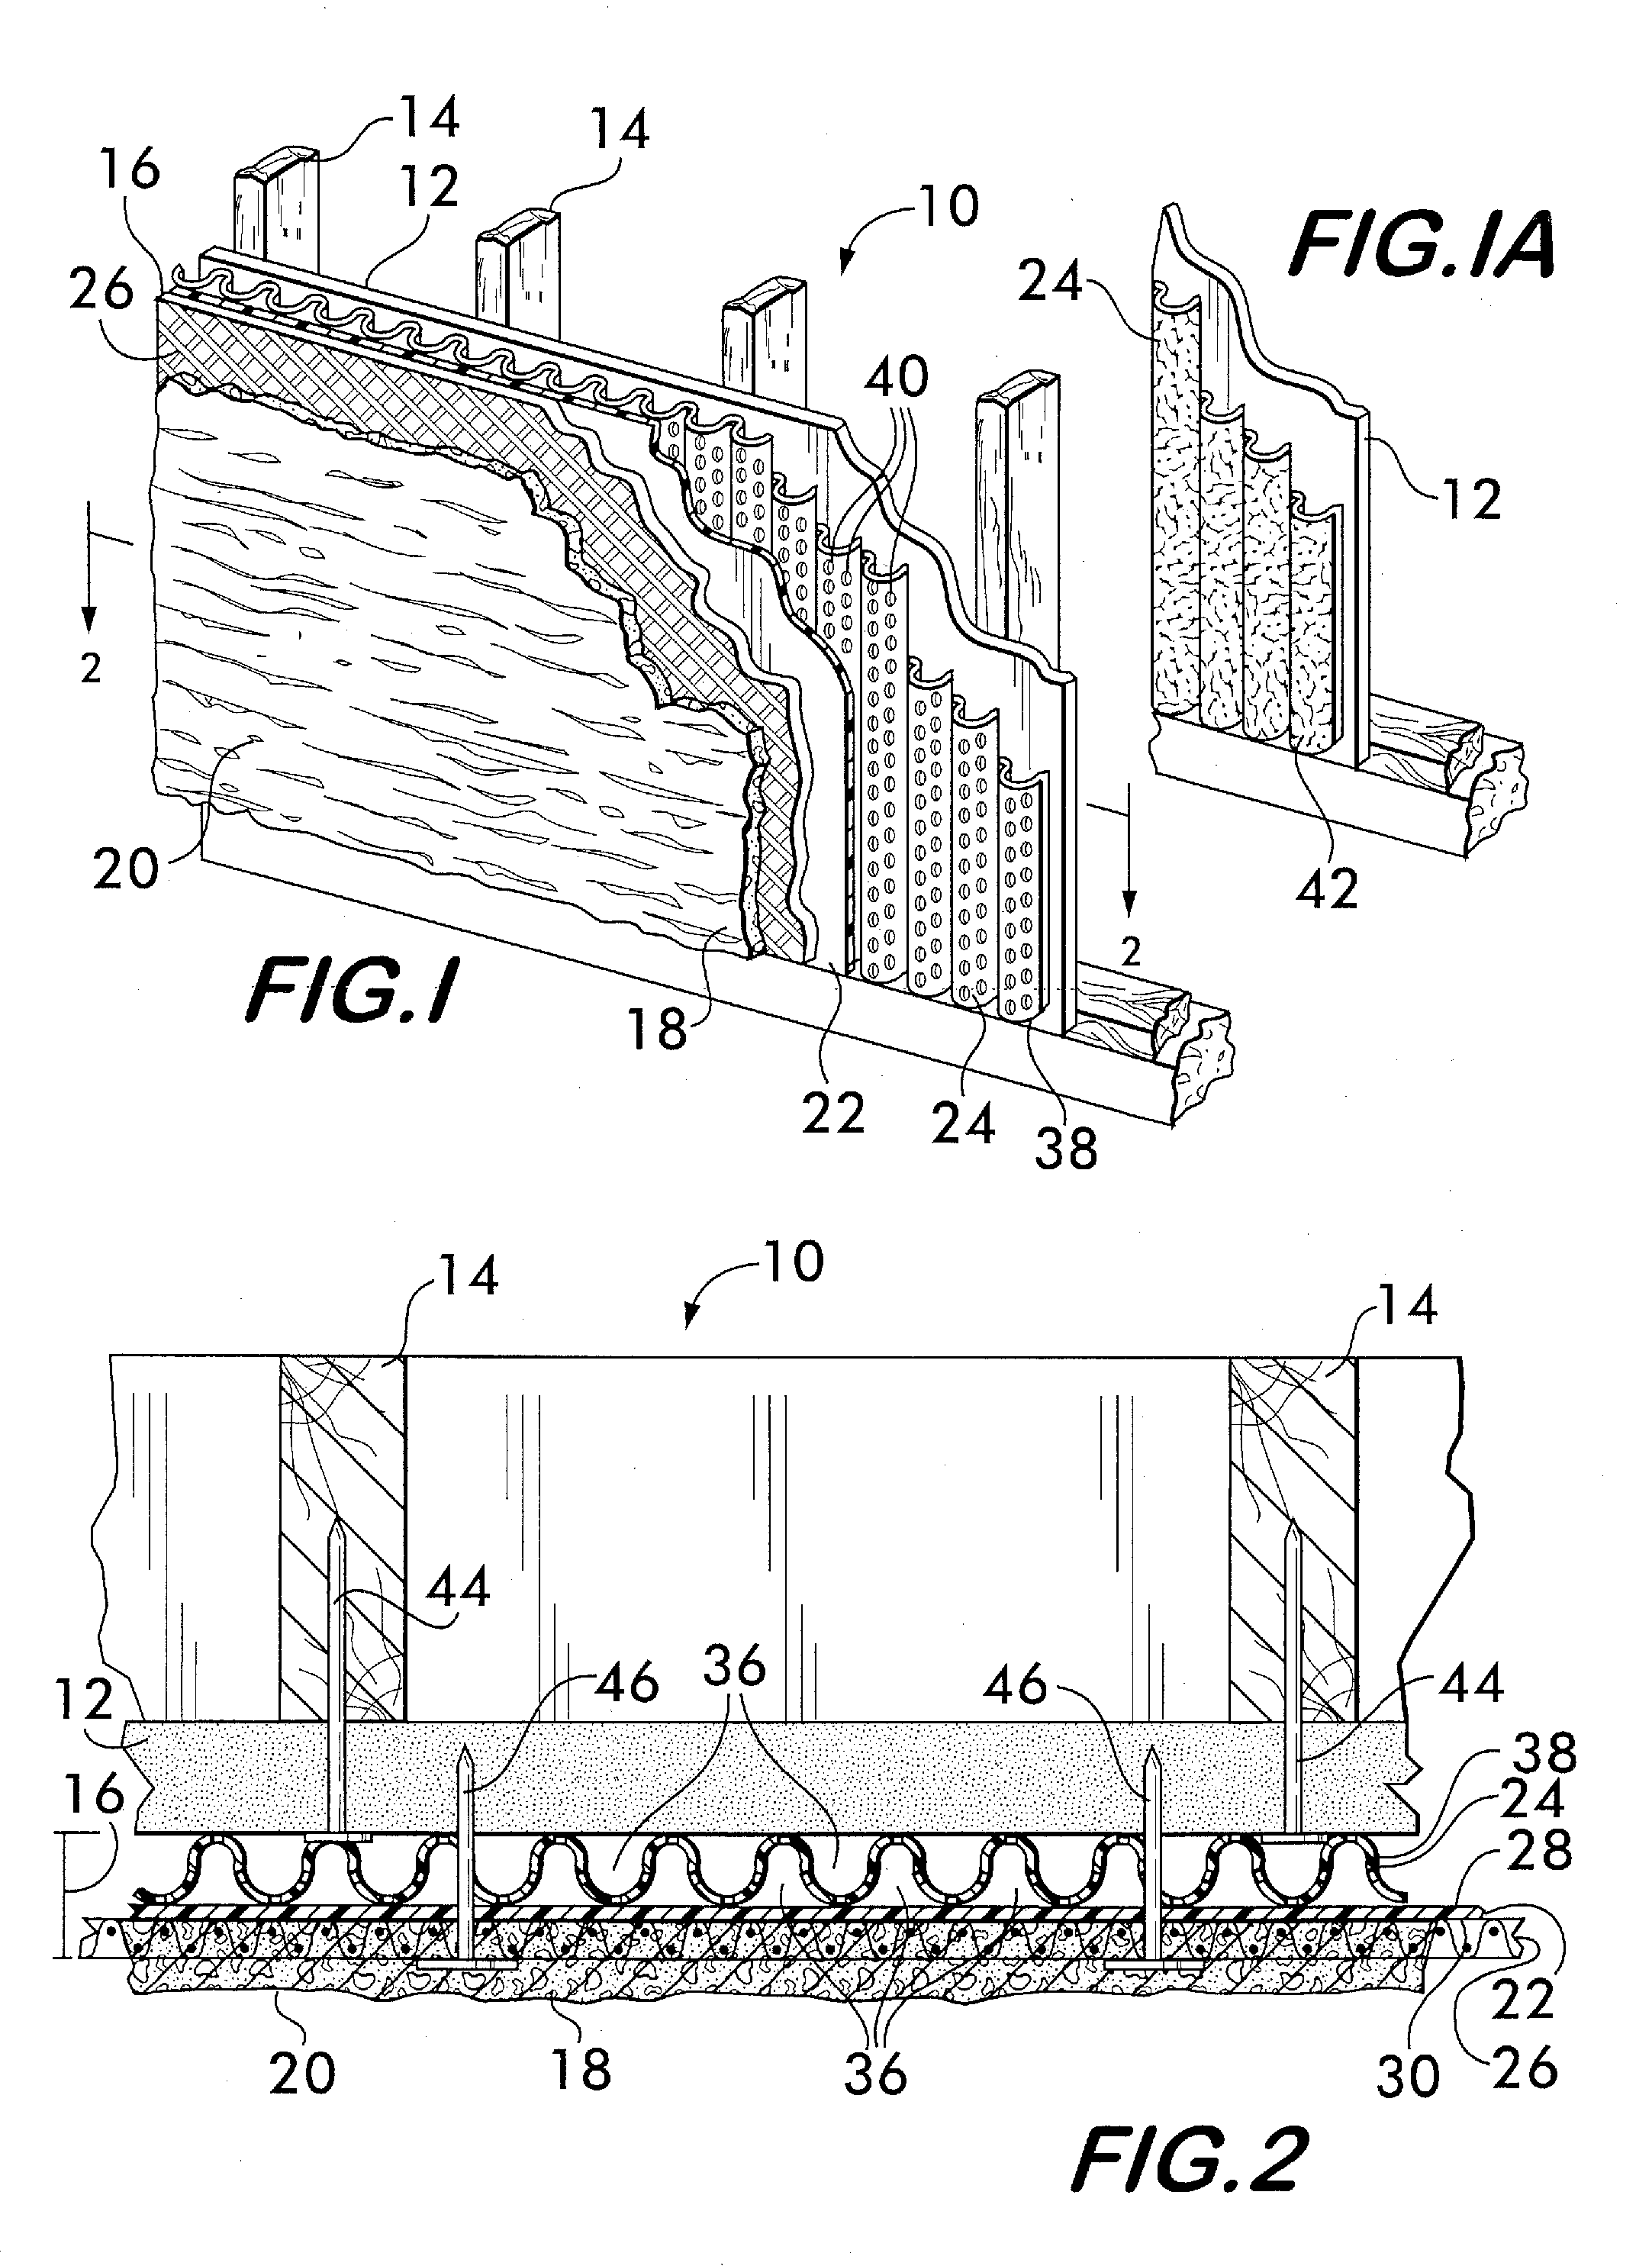 Composite Building Material for Cementitious Material Wall Assembly